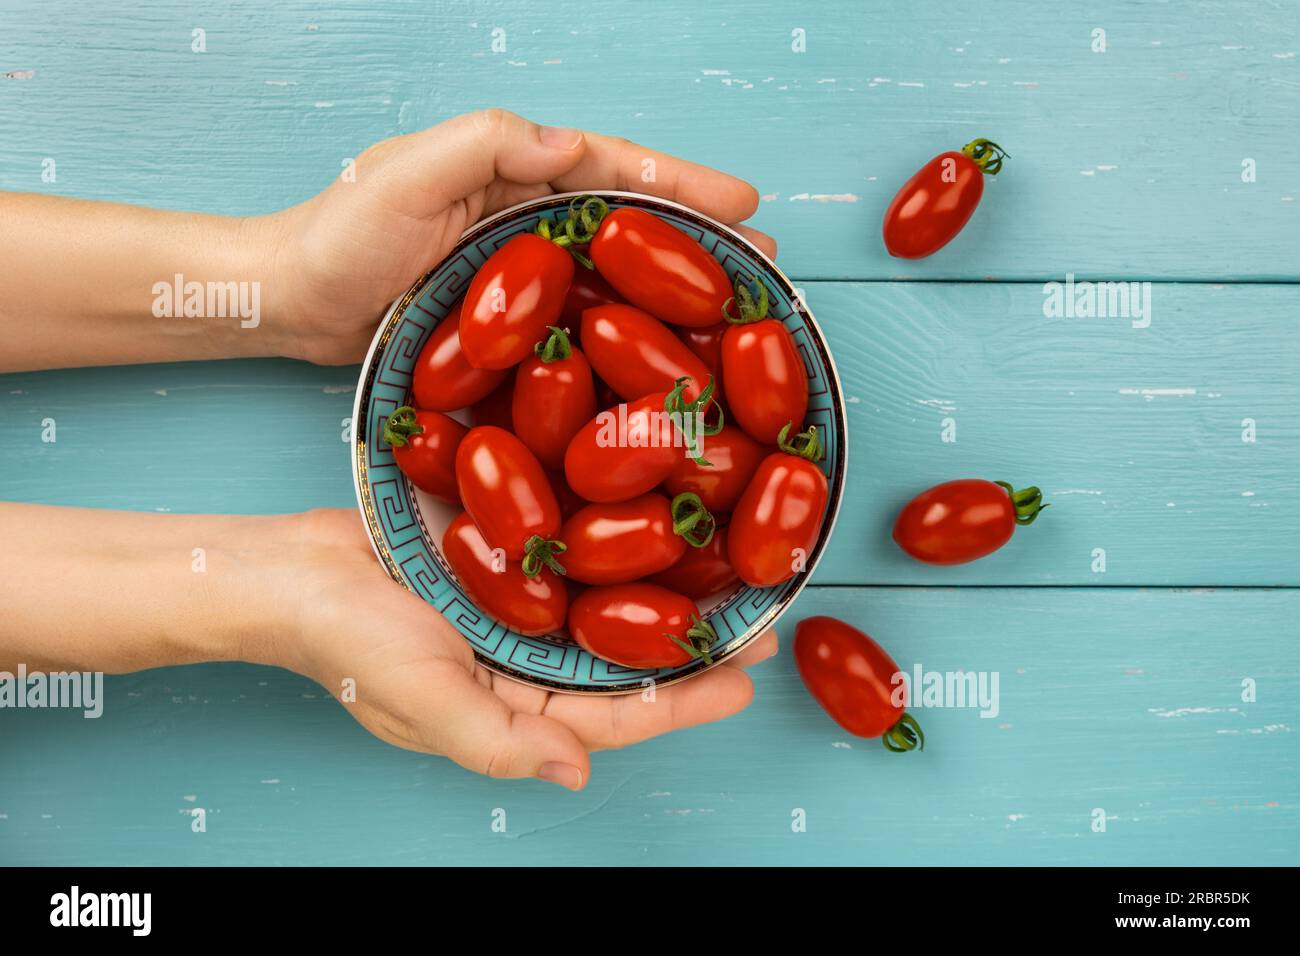 Woman hands hold bowl of red small tomatoes over turquoise wood background. Bowl of ripe Ornela cherry tomatoes in a female hands. Organic vegetables Stock Photo